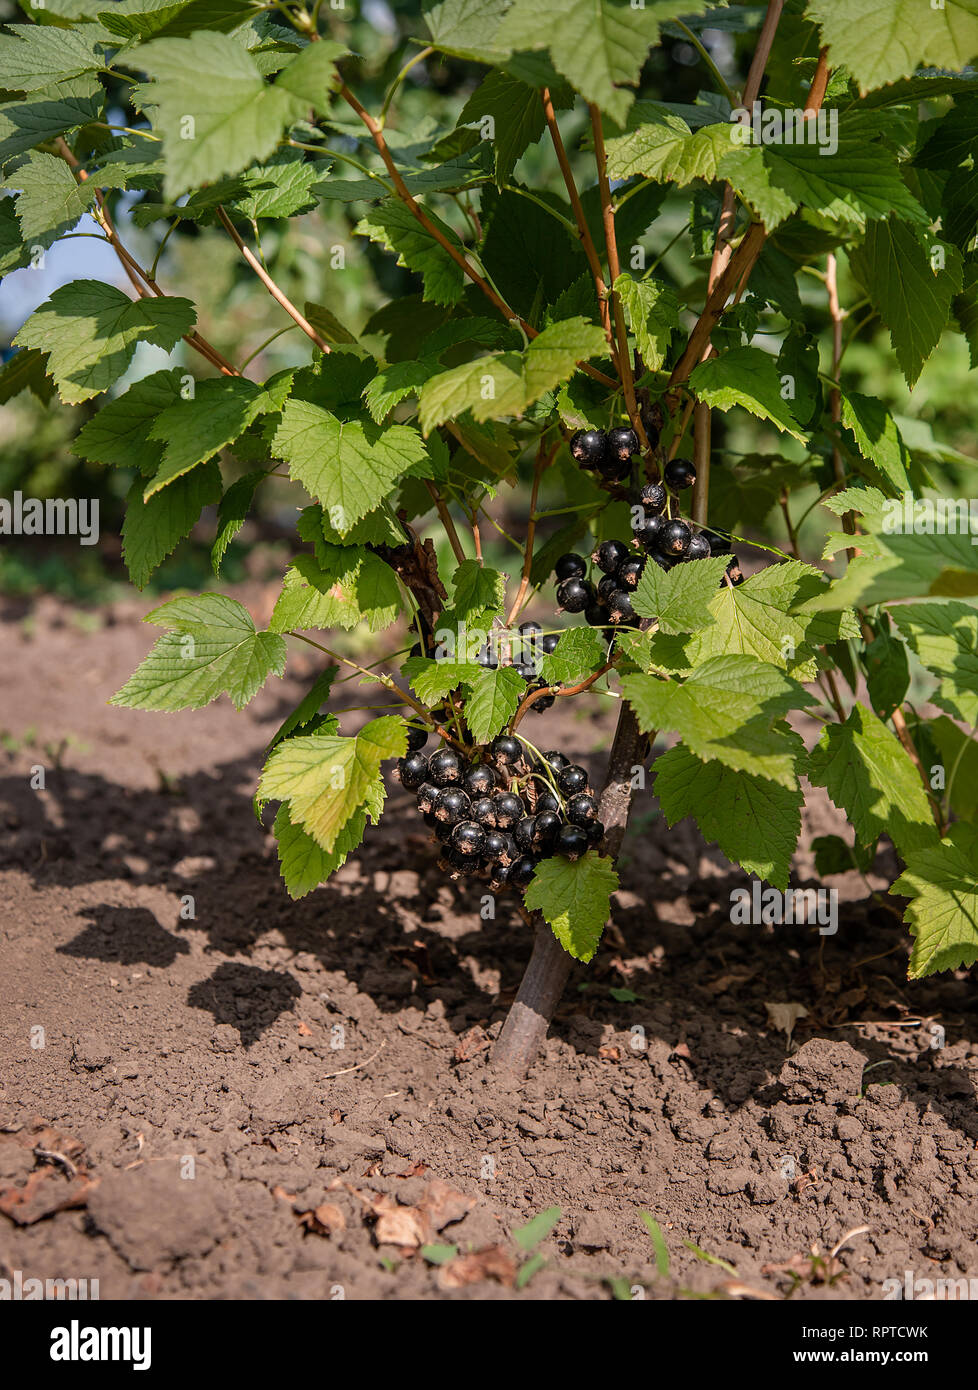 Black and juicy fresh blackcurrant berries growing on the plant. Growing organic fruits on the farm. Stock Photo